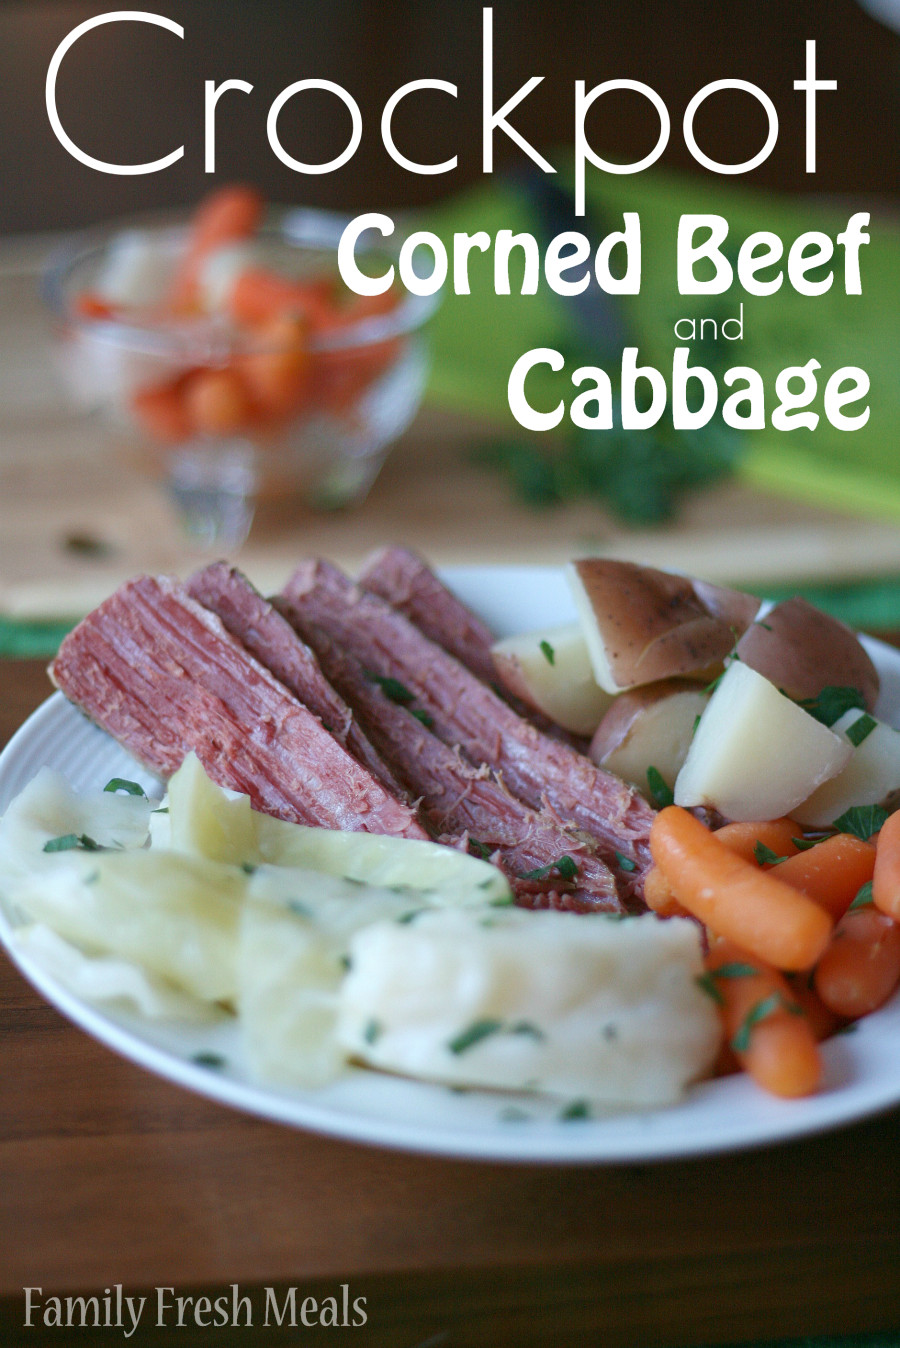 Corn Beef Recipes
 Crockpot Corned Beef and Cabbage Recipe Family Fresh Meals